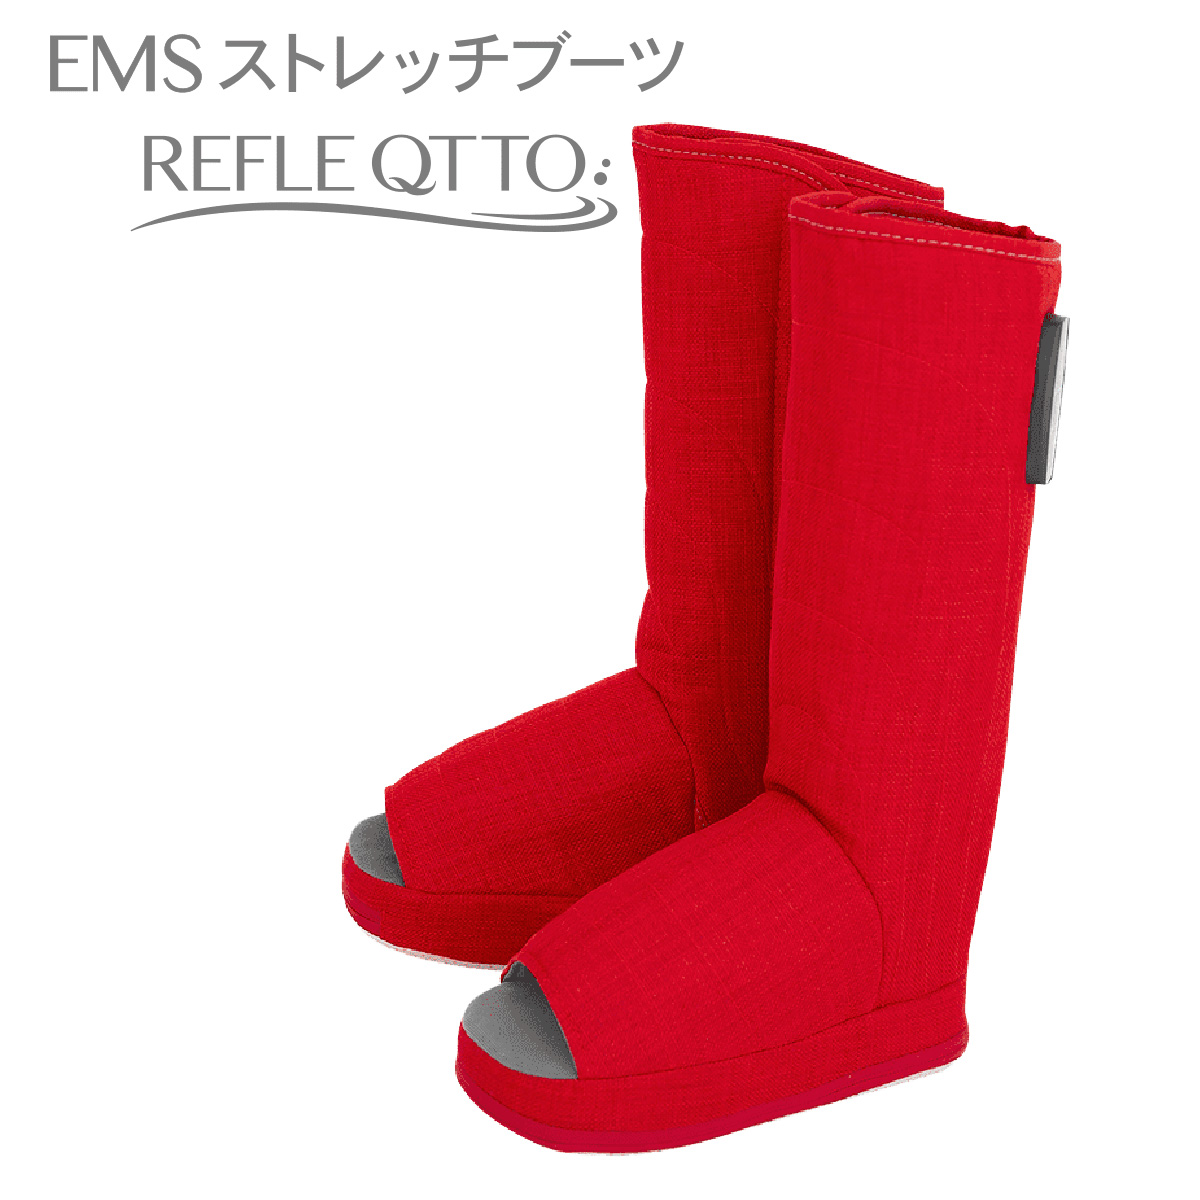 EMS stretch boots li flexible .to knee under from underfoot till ..... parcel included .. care do ..., boots type relaxation equipment.